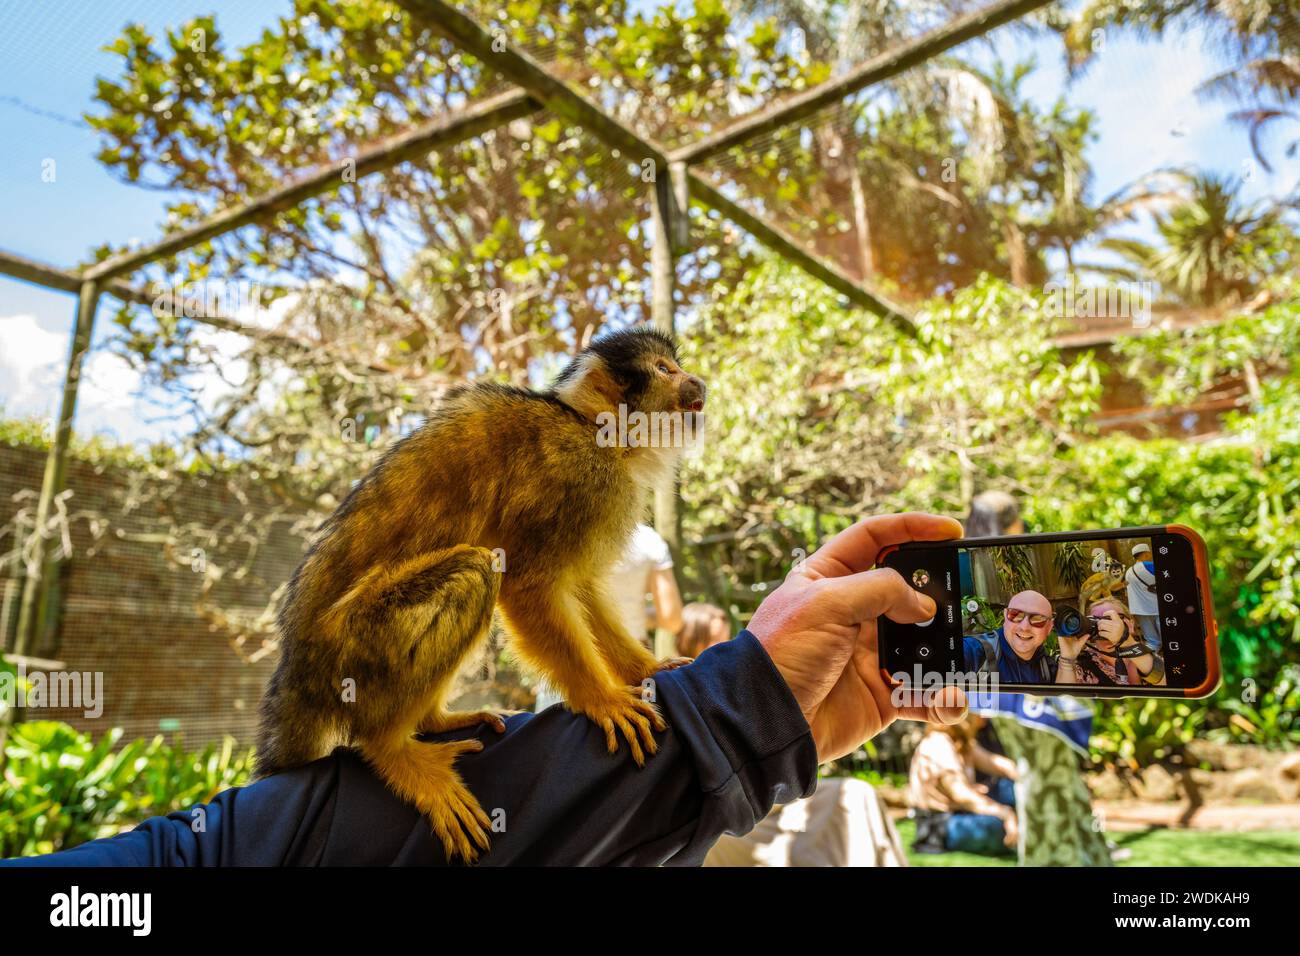 Squirrel Monkey sitting on an arm with tourists taking a selfie on the smartphone. Stock Photo